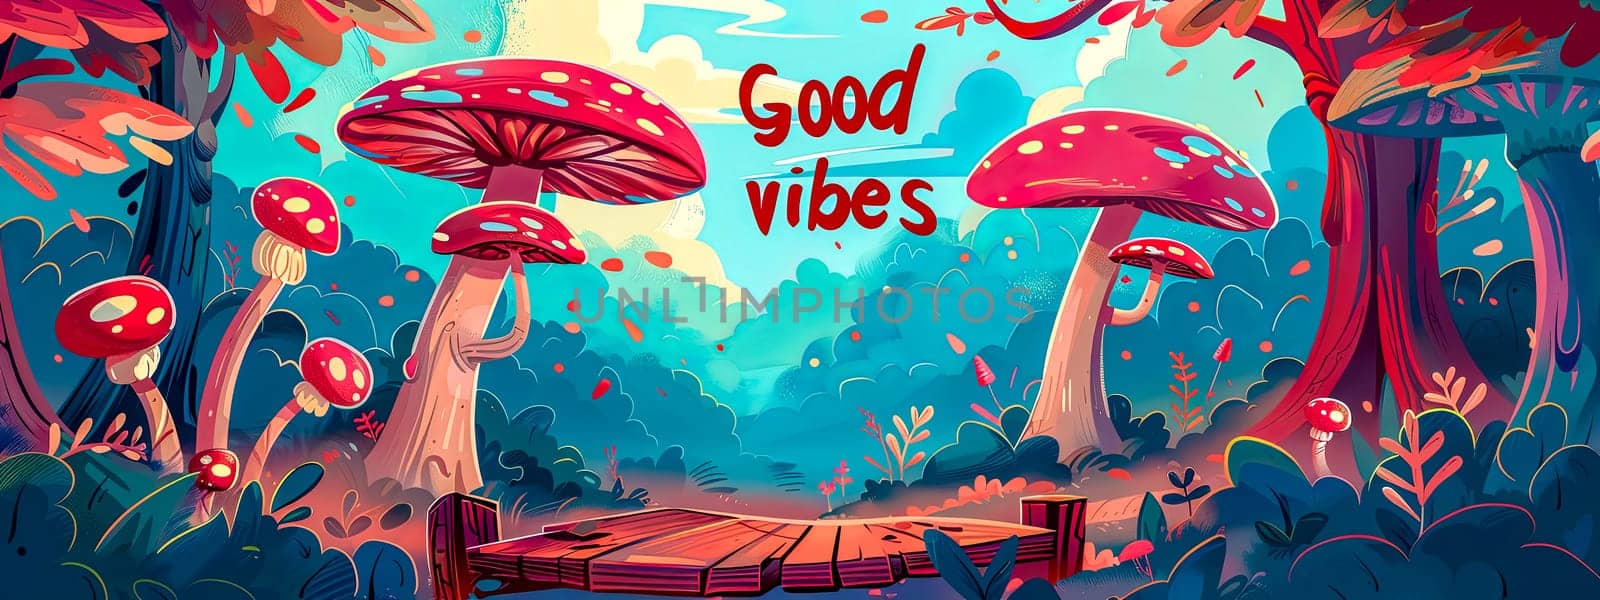 Colorful illustration of a whimsical forest with giant mushrooms and a good vibes sign